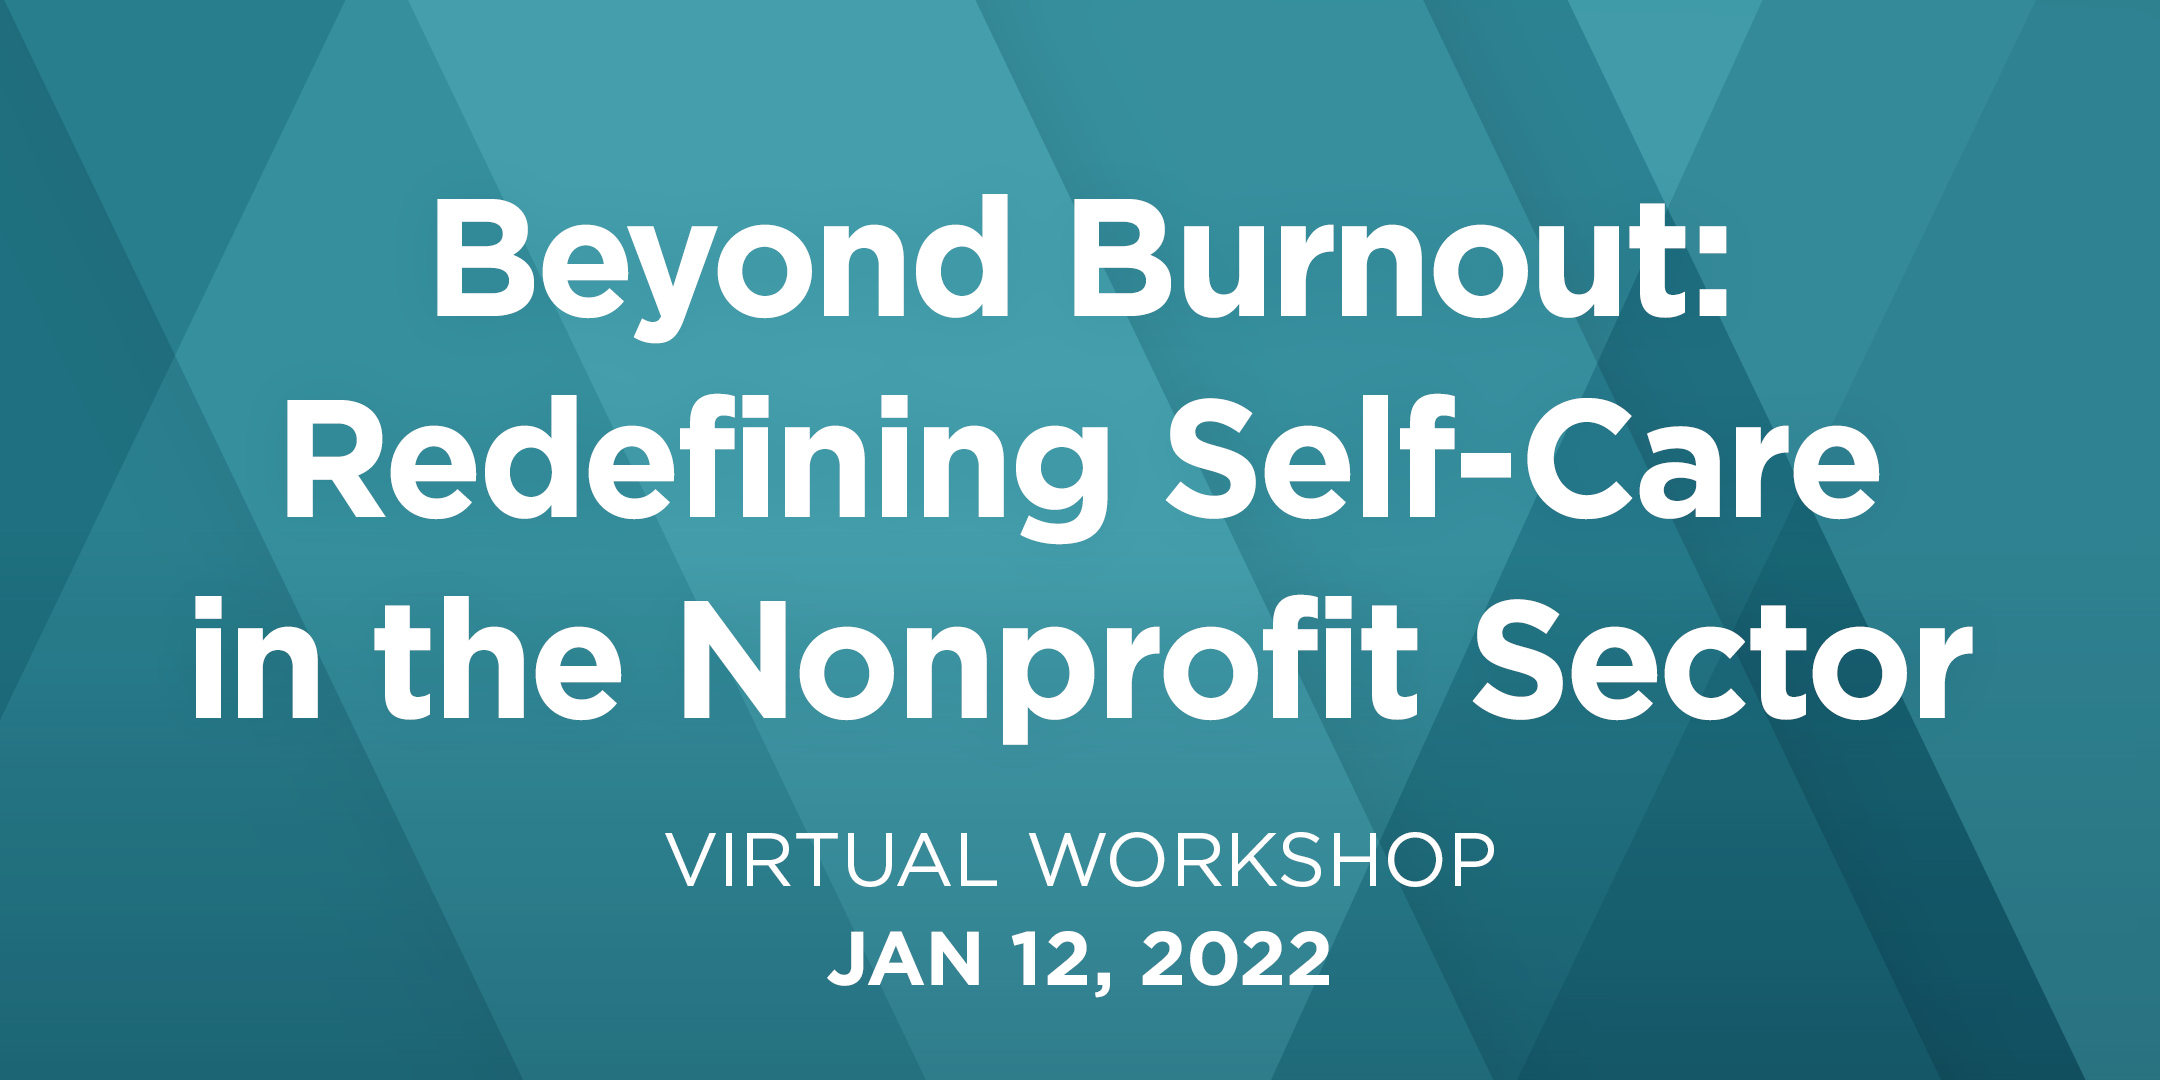 Beyond Burnout: Redefining Self-Care in the Nonprofit Sector